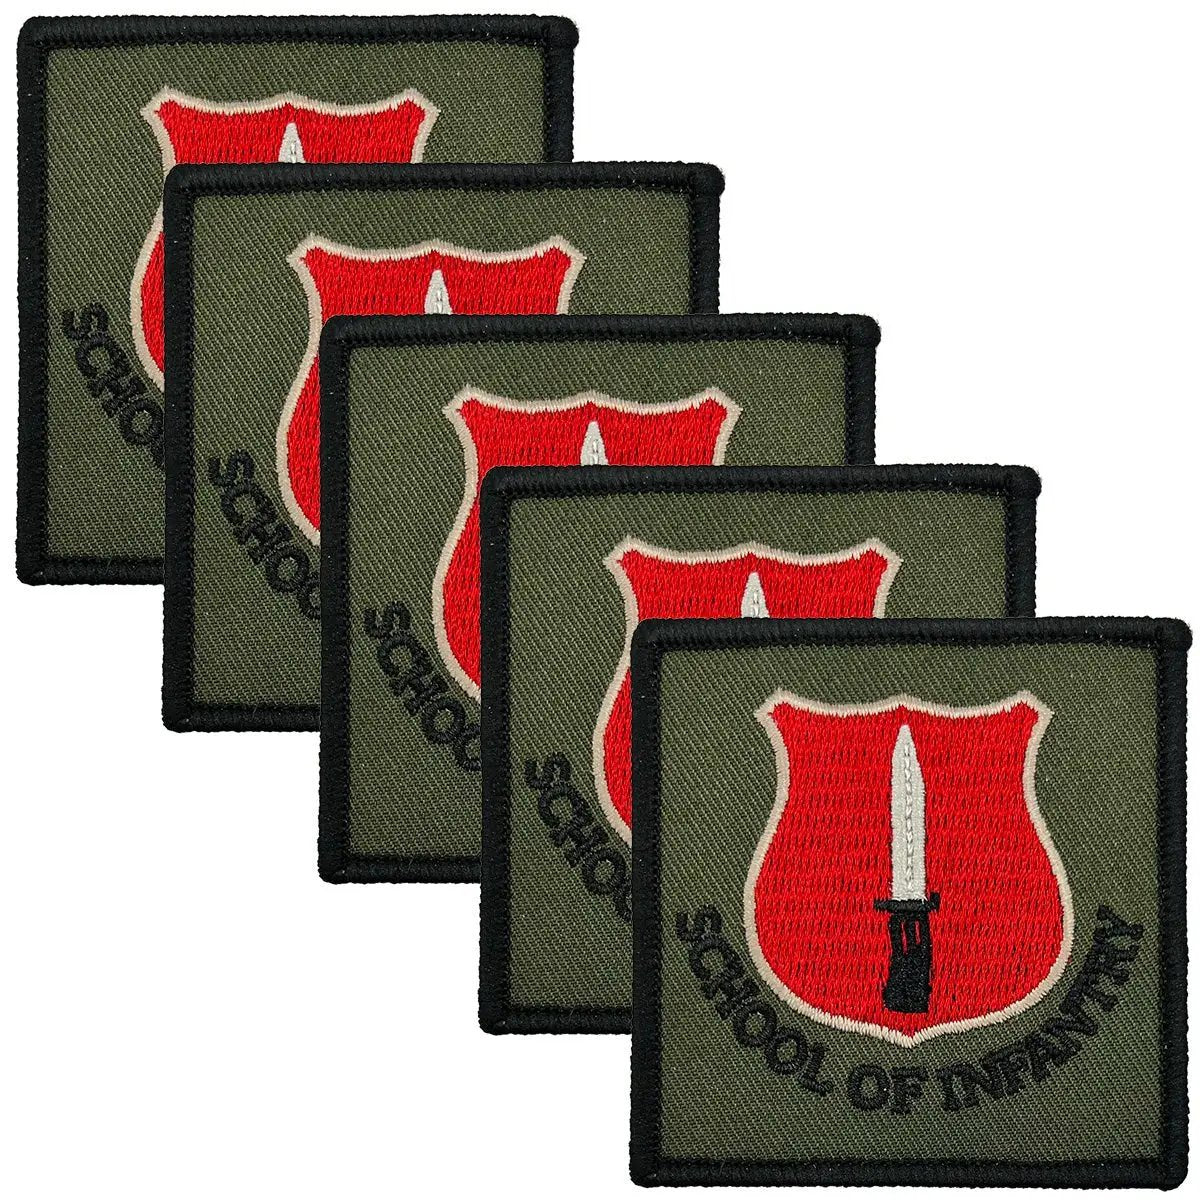 ITC School of Infantry Trade Recognition TRF - Iron or Sewn On Patch - John Bull Clothing